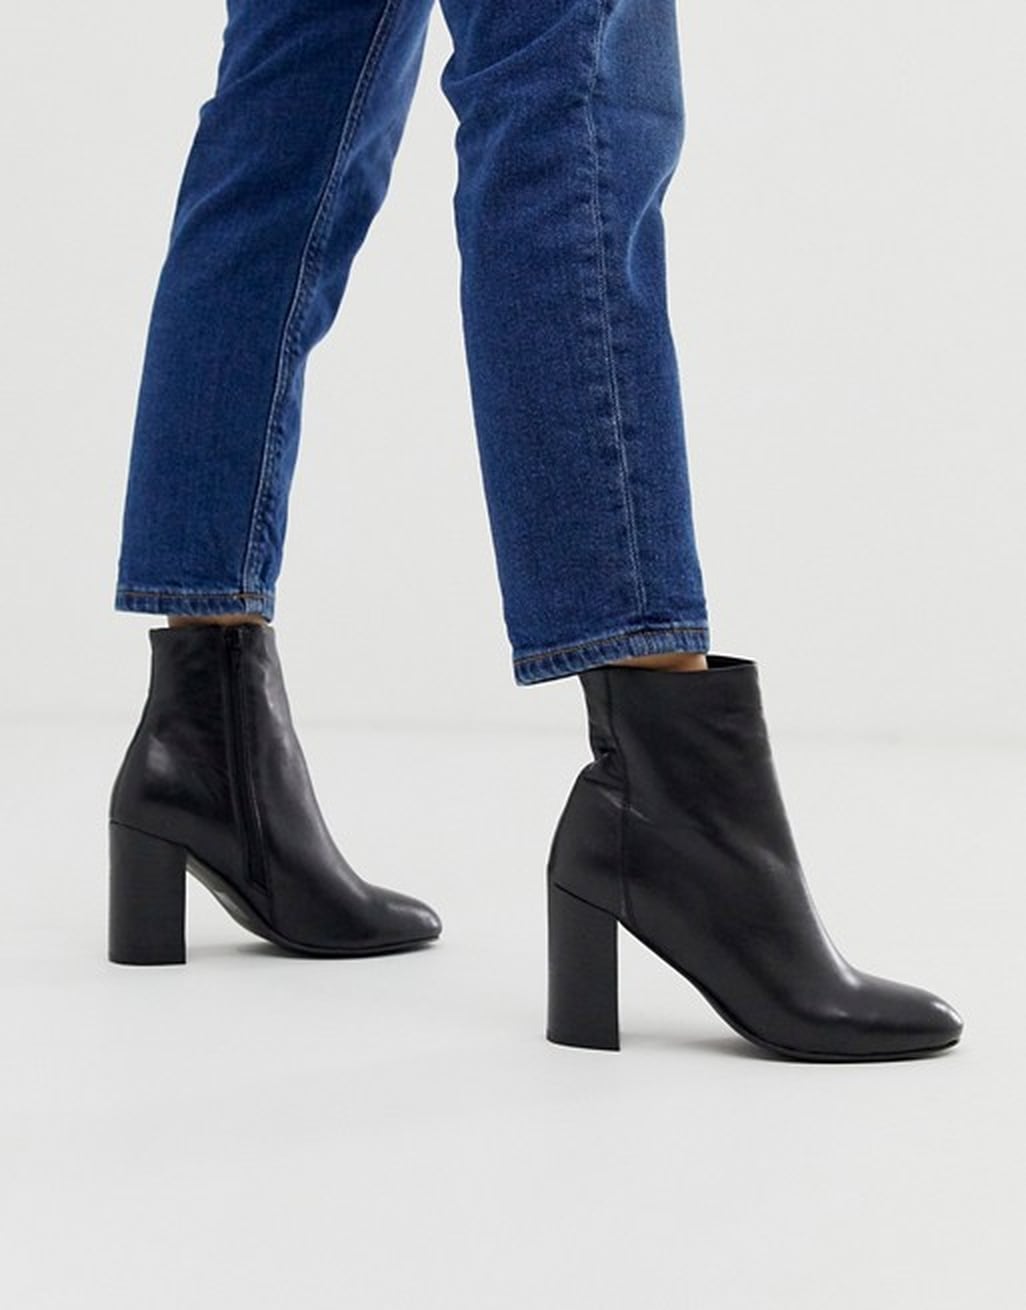 How to Wear Ankle Boots | 2020 | POPSUGAR Fashion